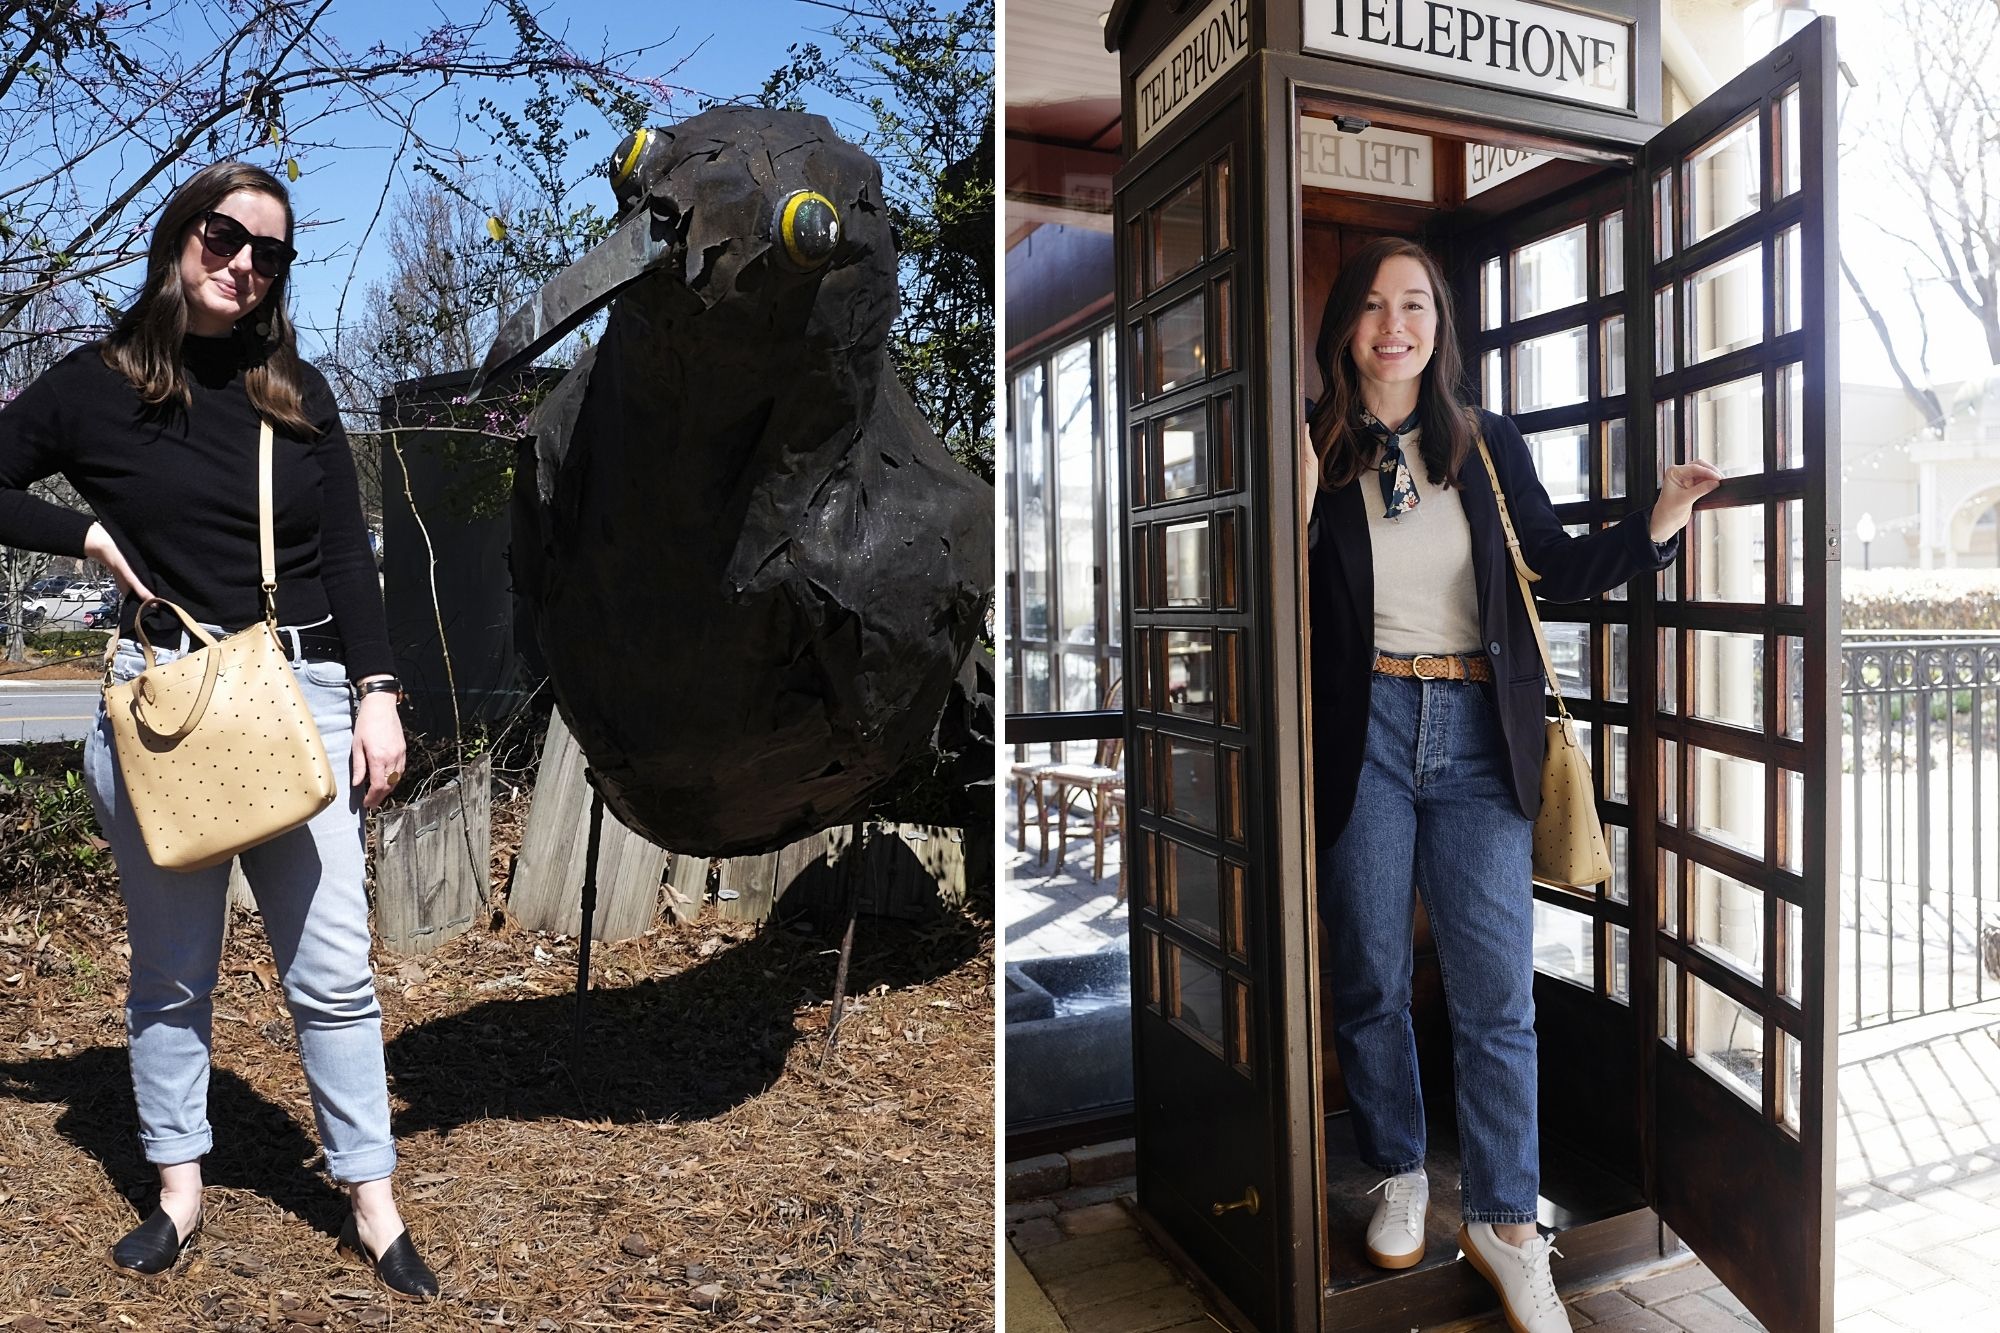 Left: Alyssa stands with a crow sculpture; Right: Alyssa stands in a phone booth